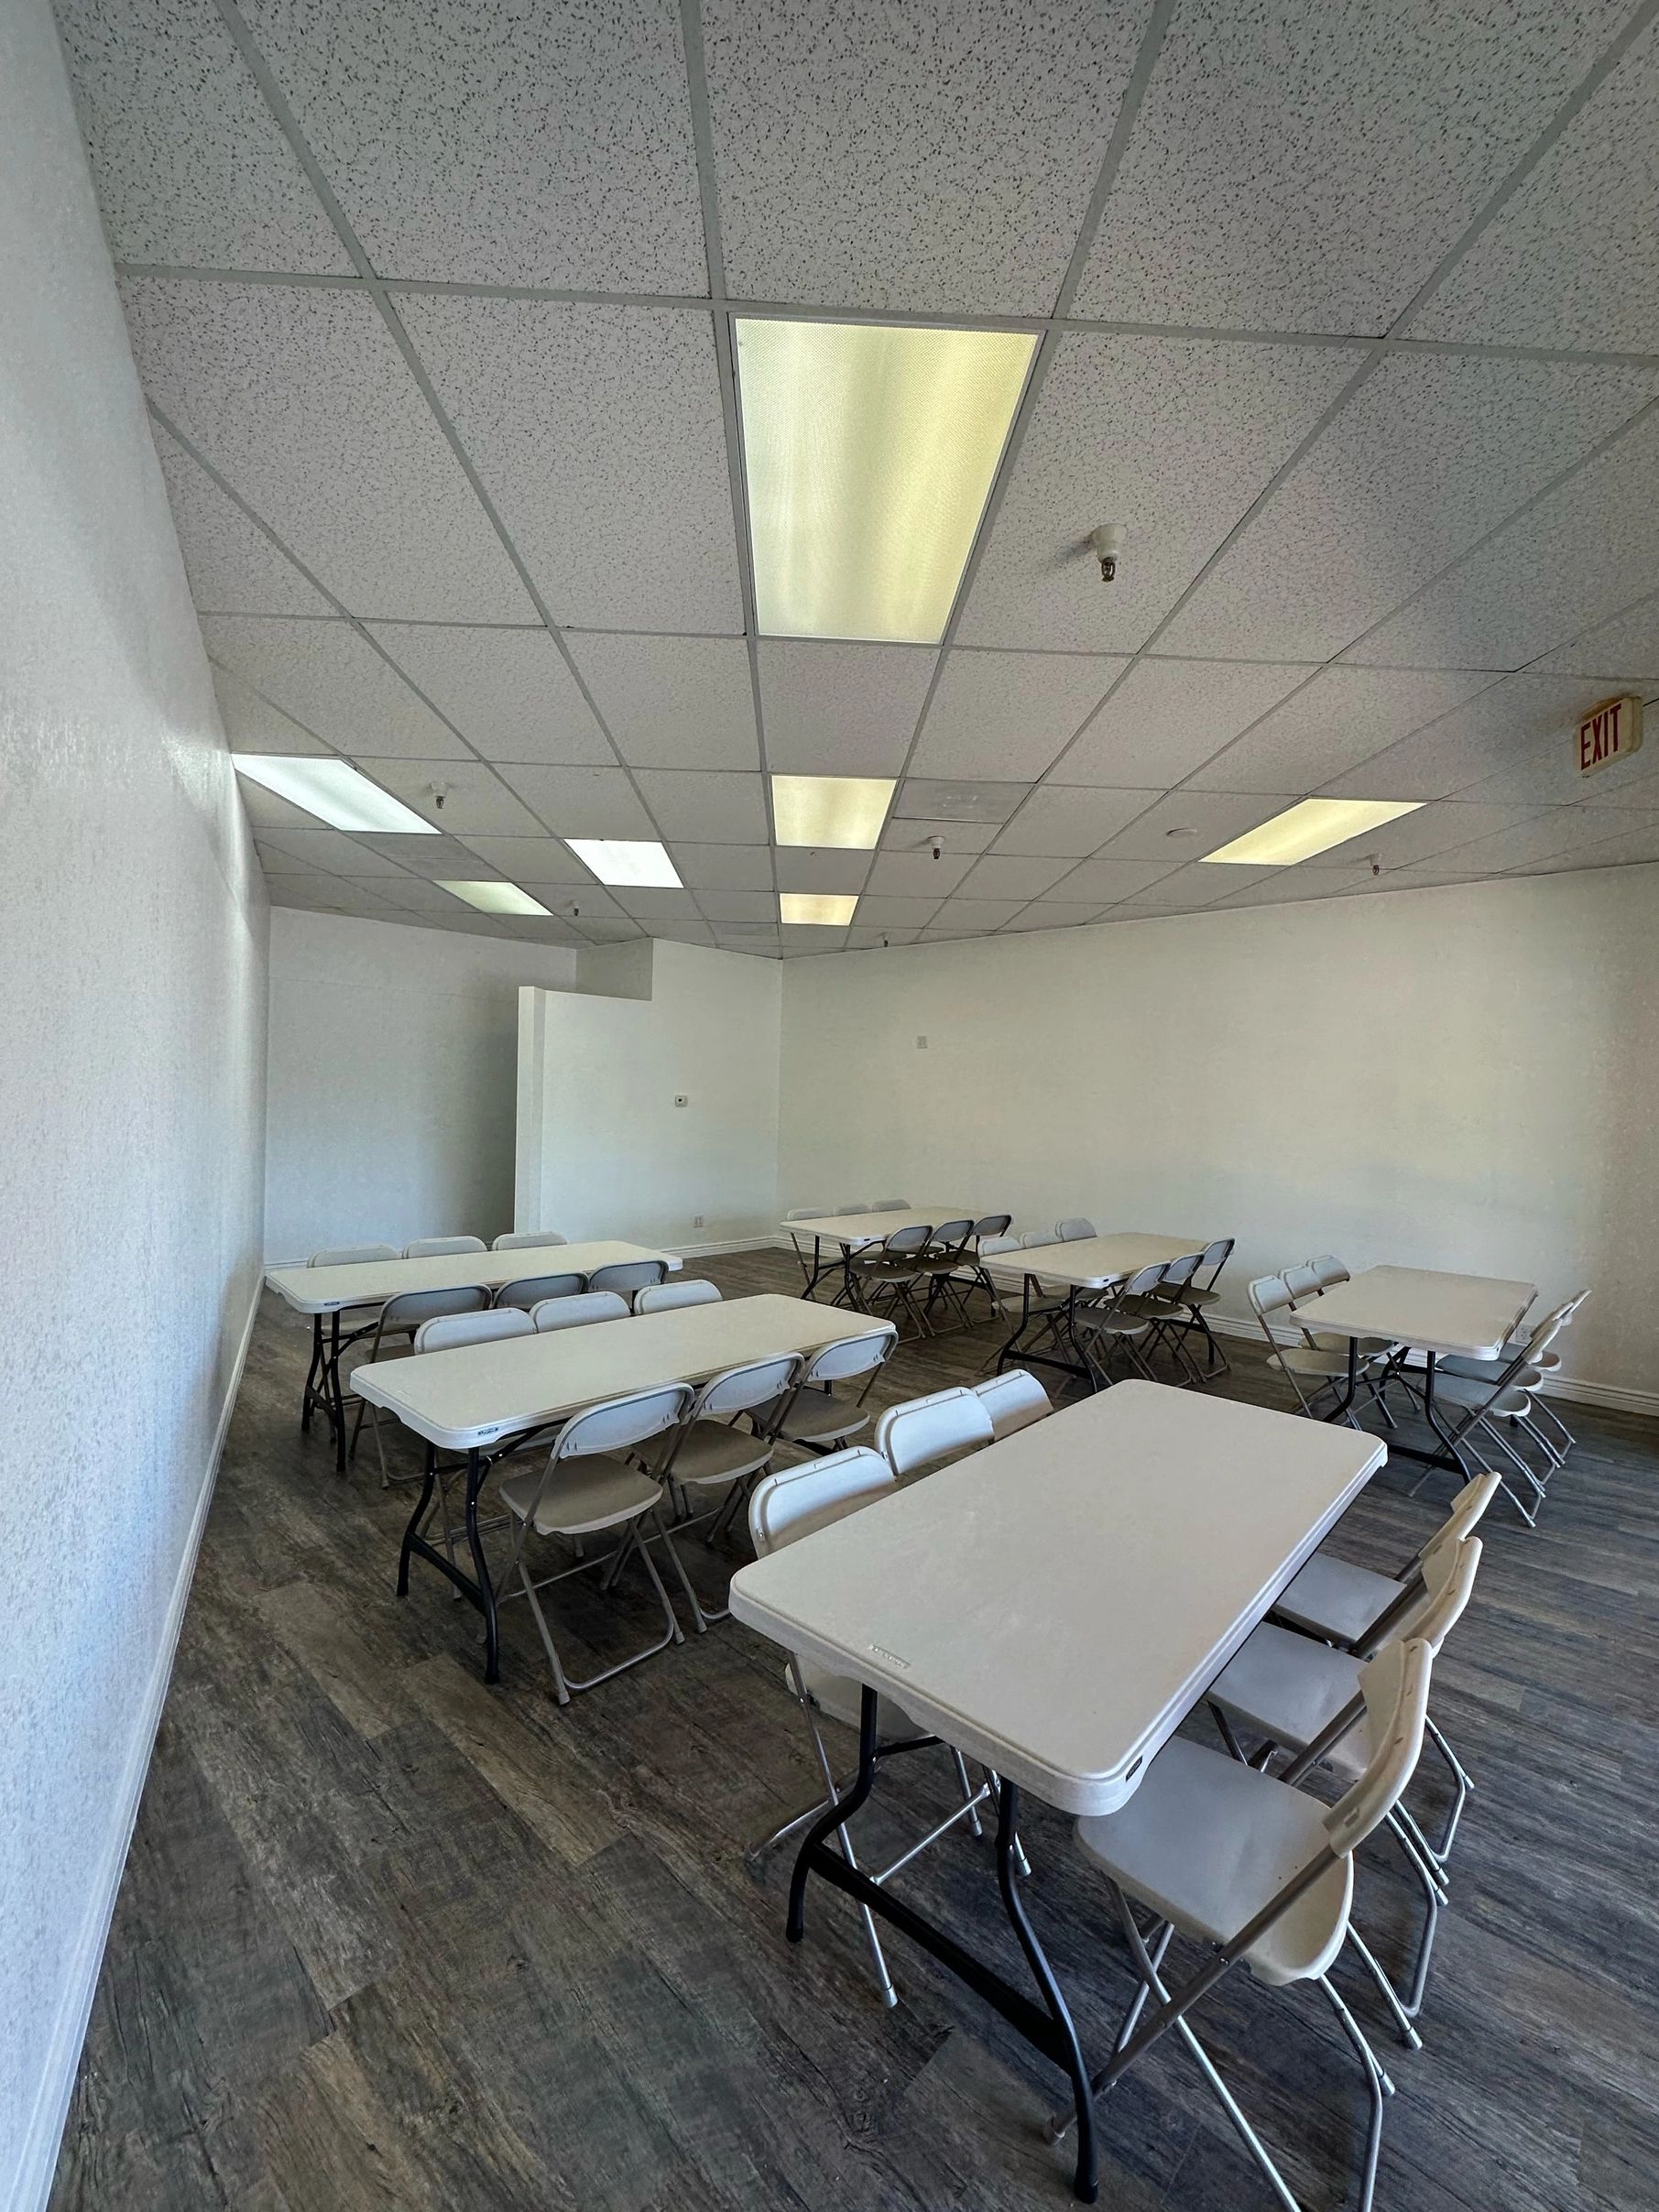 Host and Invite Room Versatile & Spacious Layout Available for Event Rentals